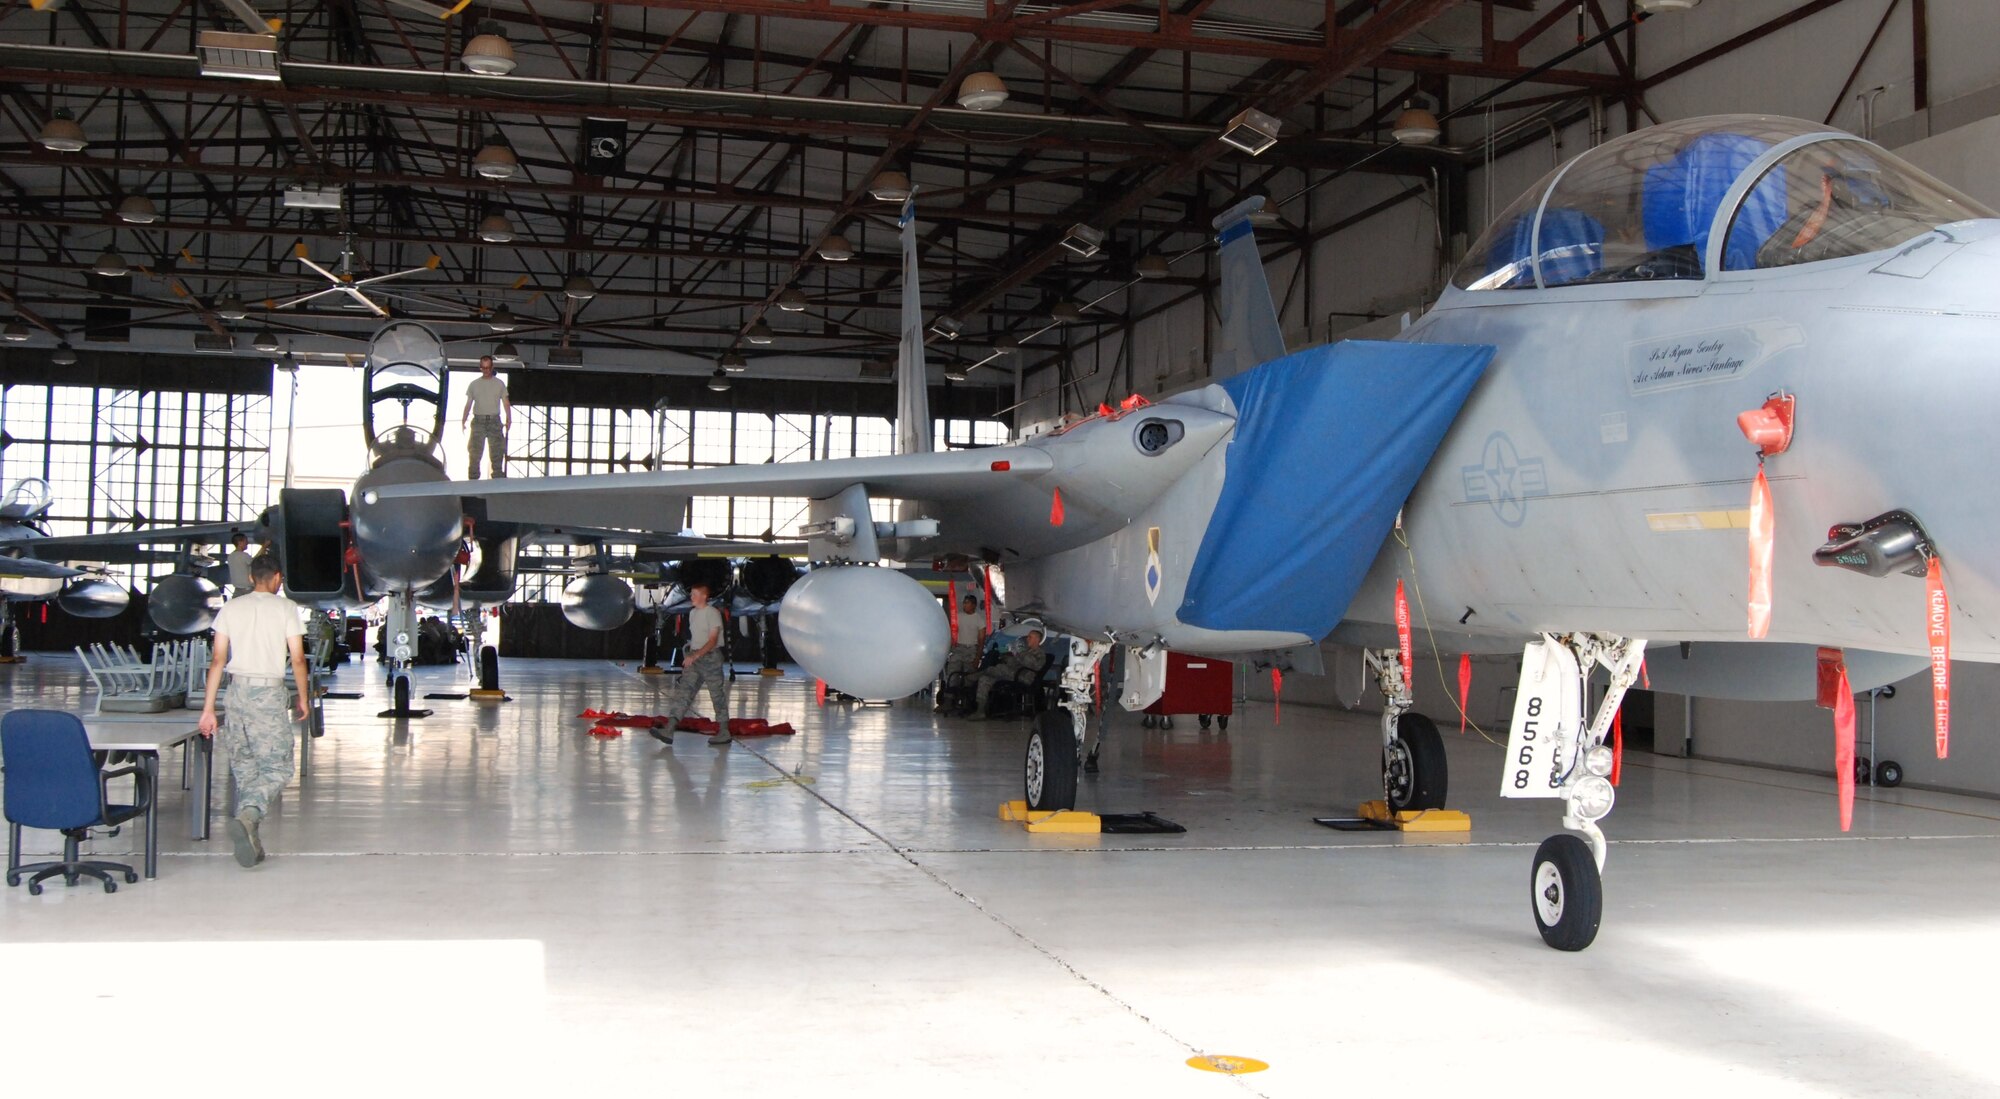 An F-15D (front) is parked in a training hangar at Sheppard Air Force Base, Texas, July 23 to be used for training F-15 aircraft maintenance students on the latest equipment and controls of an F-15 jet. Sheppard acquired a total of 13 F-15s which were converted into trainers to update F-15 maintenance courses that used F-15A and F-15B models, which do not match the models currently used on operational flightlines.  The newer-model aircraft is awaiting the arrival of technical orders before it can be used to instruct students.  (U.S. Air Force photo/Tech. Sgt. Vernon Cunningham)